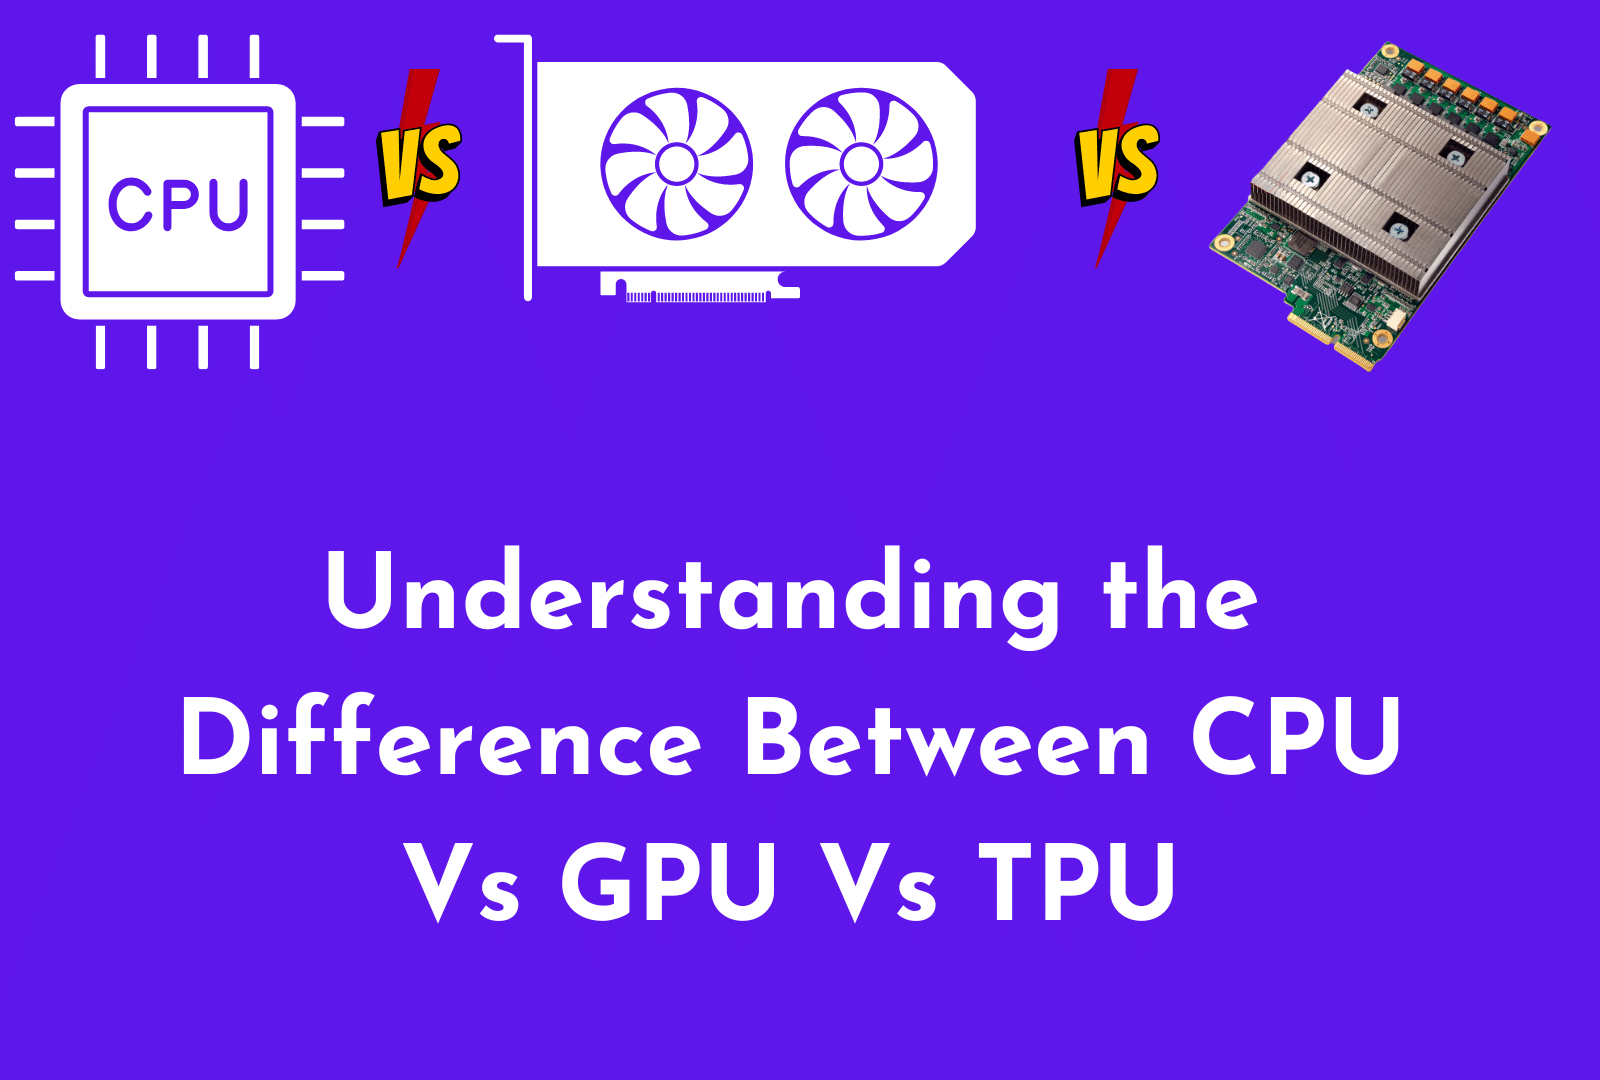 C:\Users\Mohsin\Downloads\Understanding the Difference Between CPU Vs GPU Vs TPU.png